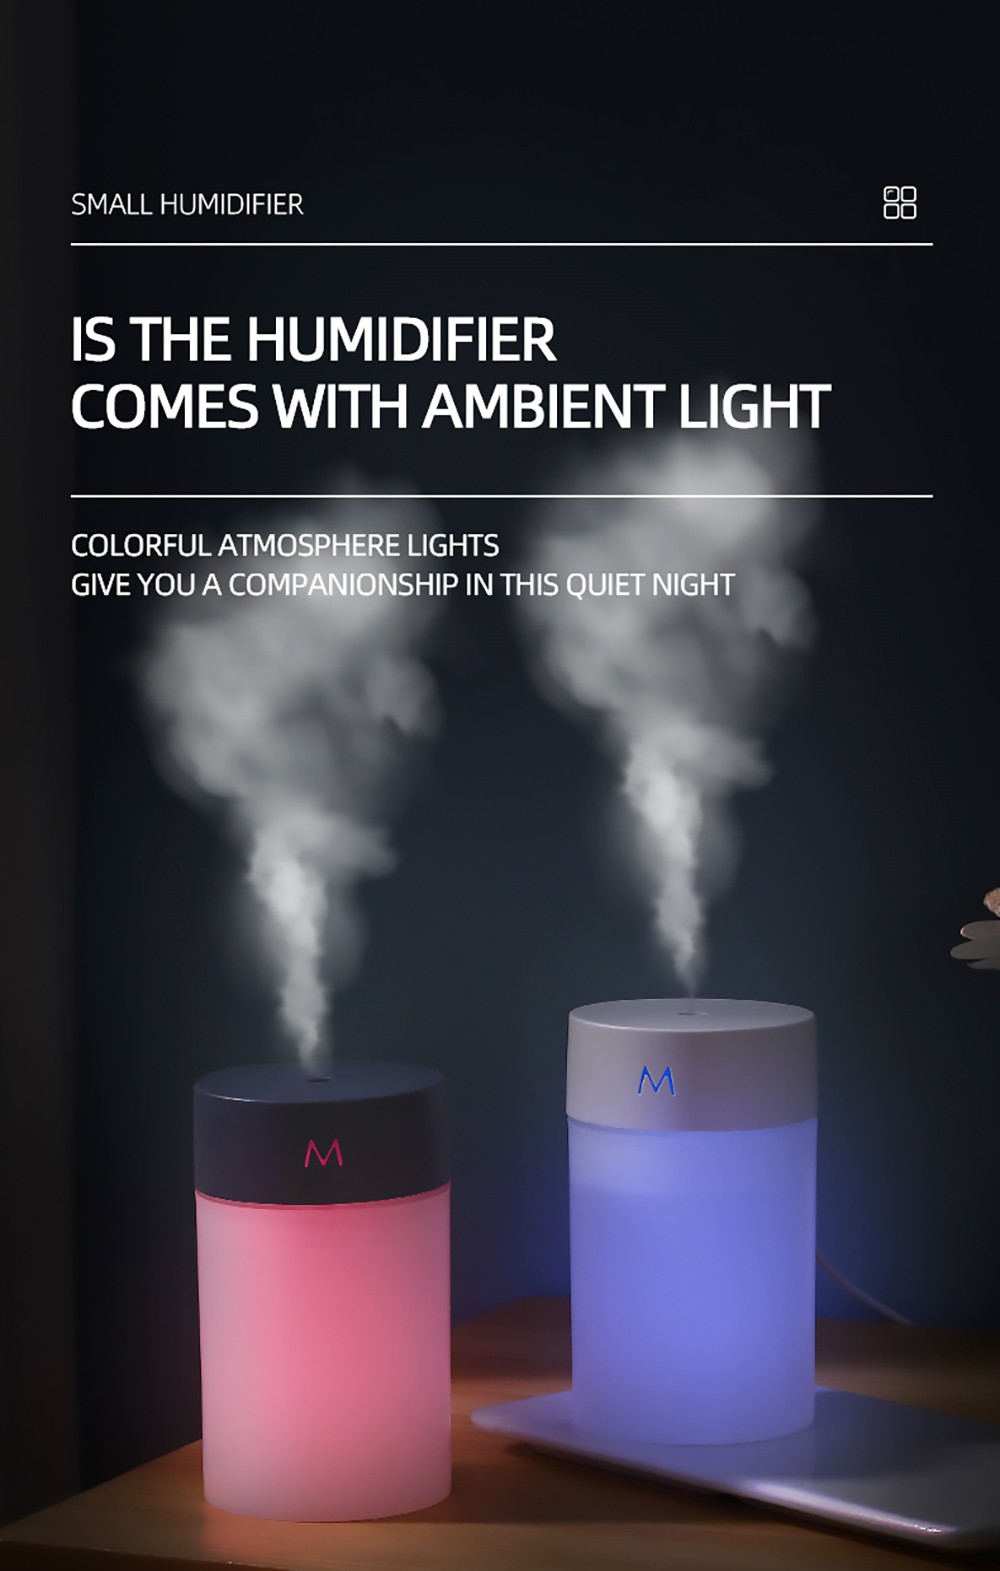 260ML Air Humidifier Ultrasonic Mini Aromatherapy Diffuser Portable Sprayer USB Essential Oil Atomizer LED Lamp - Pink